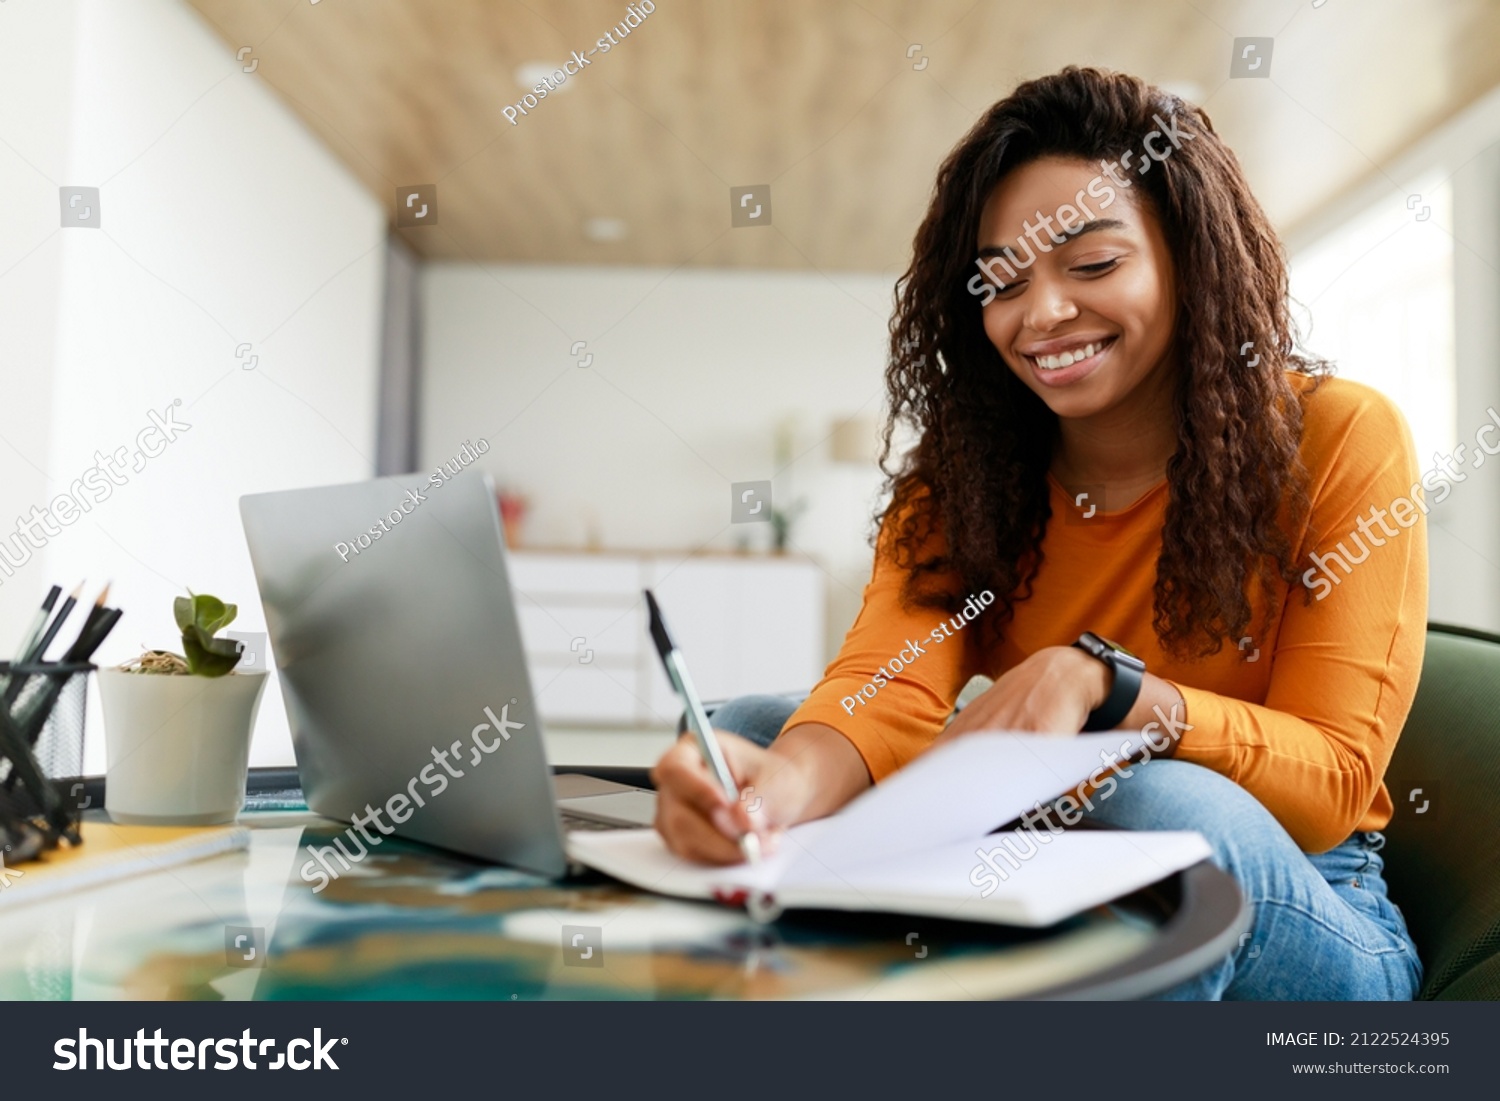 Business And Education Concept. Smiling young black woman sitting at desk working on laptop writing letter in paper notebook, free copy space. Happy millennial female studying using pc #2122524395